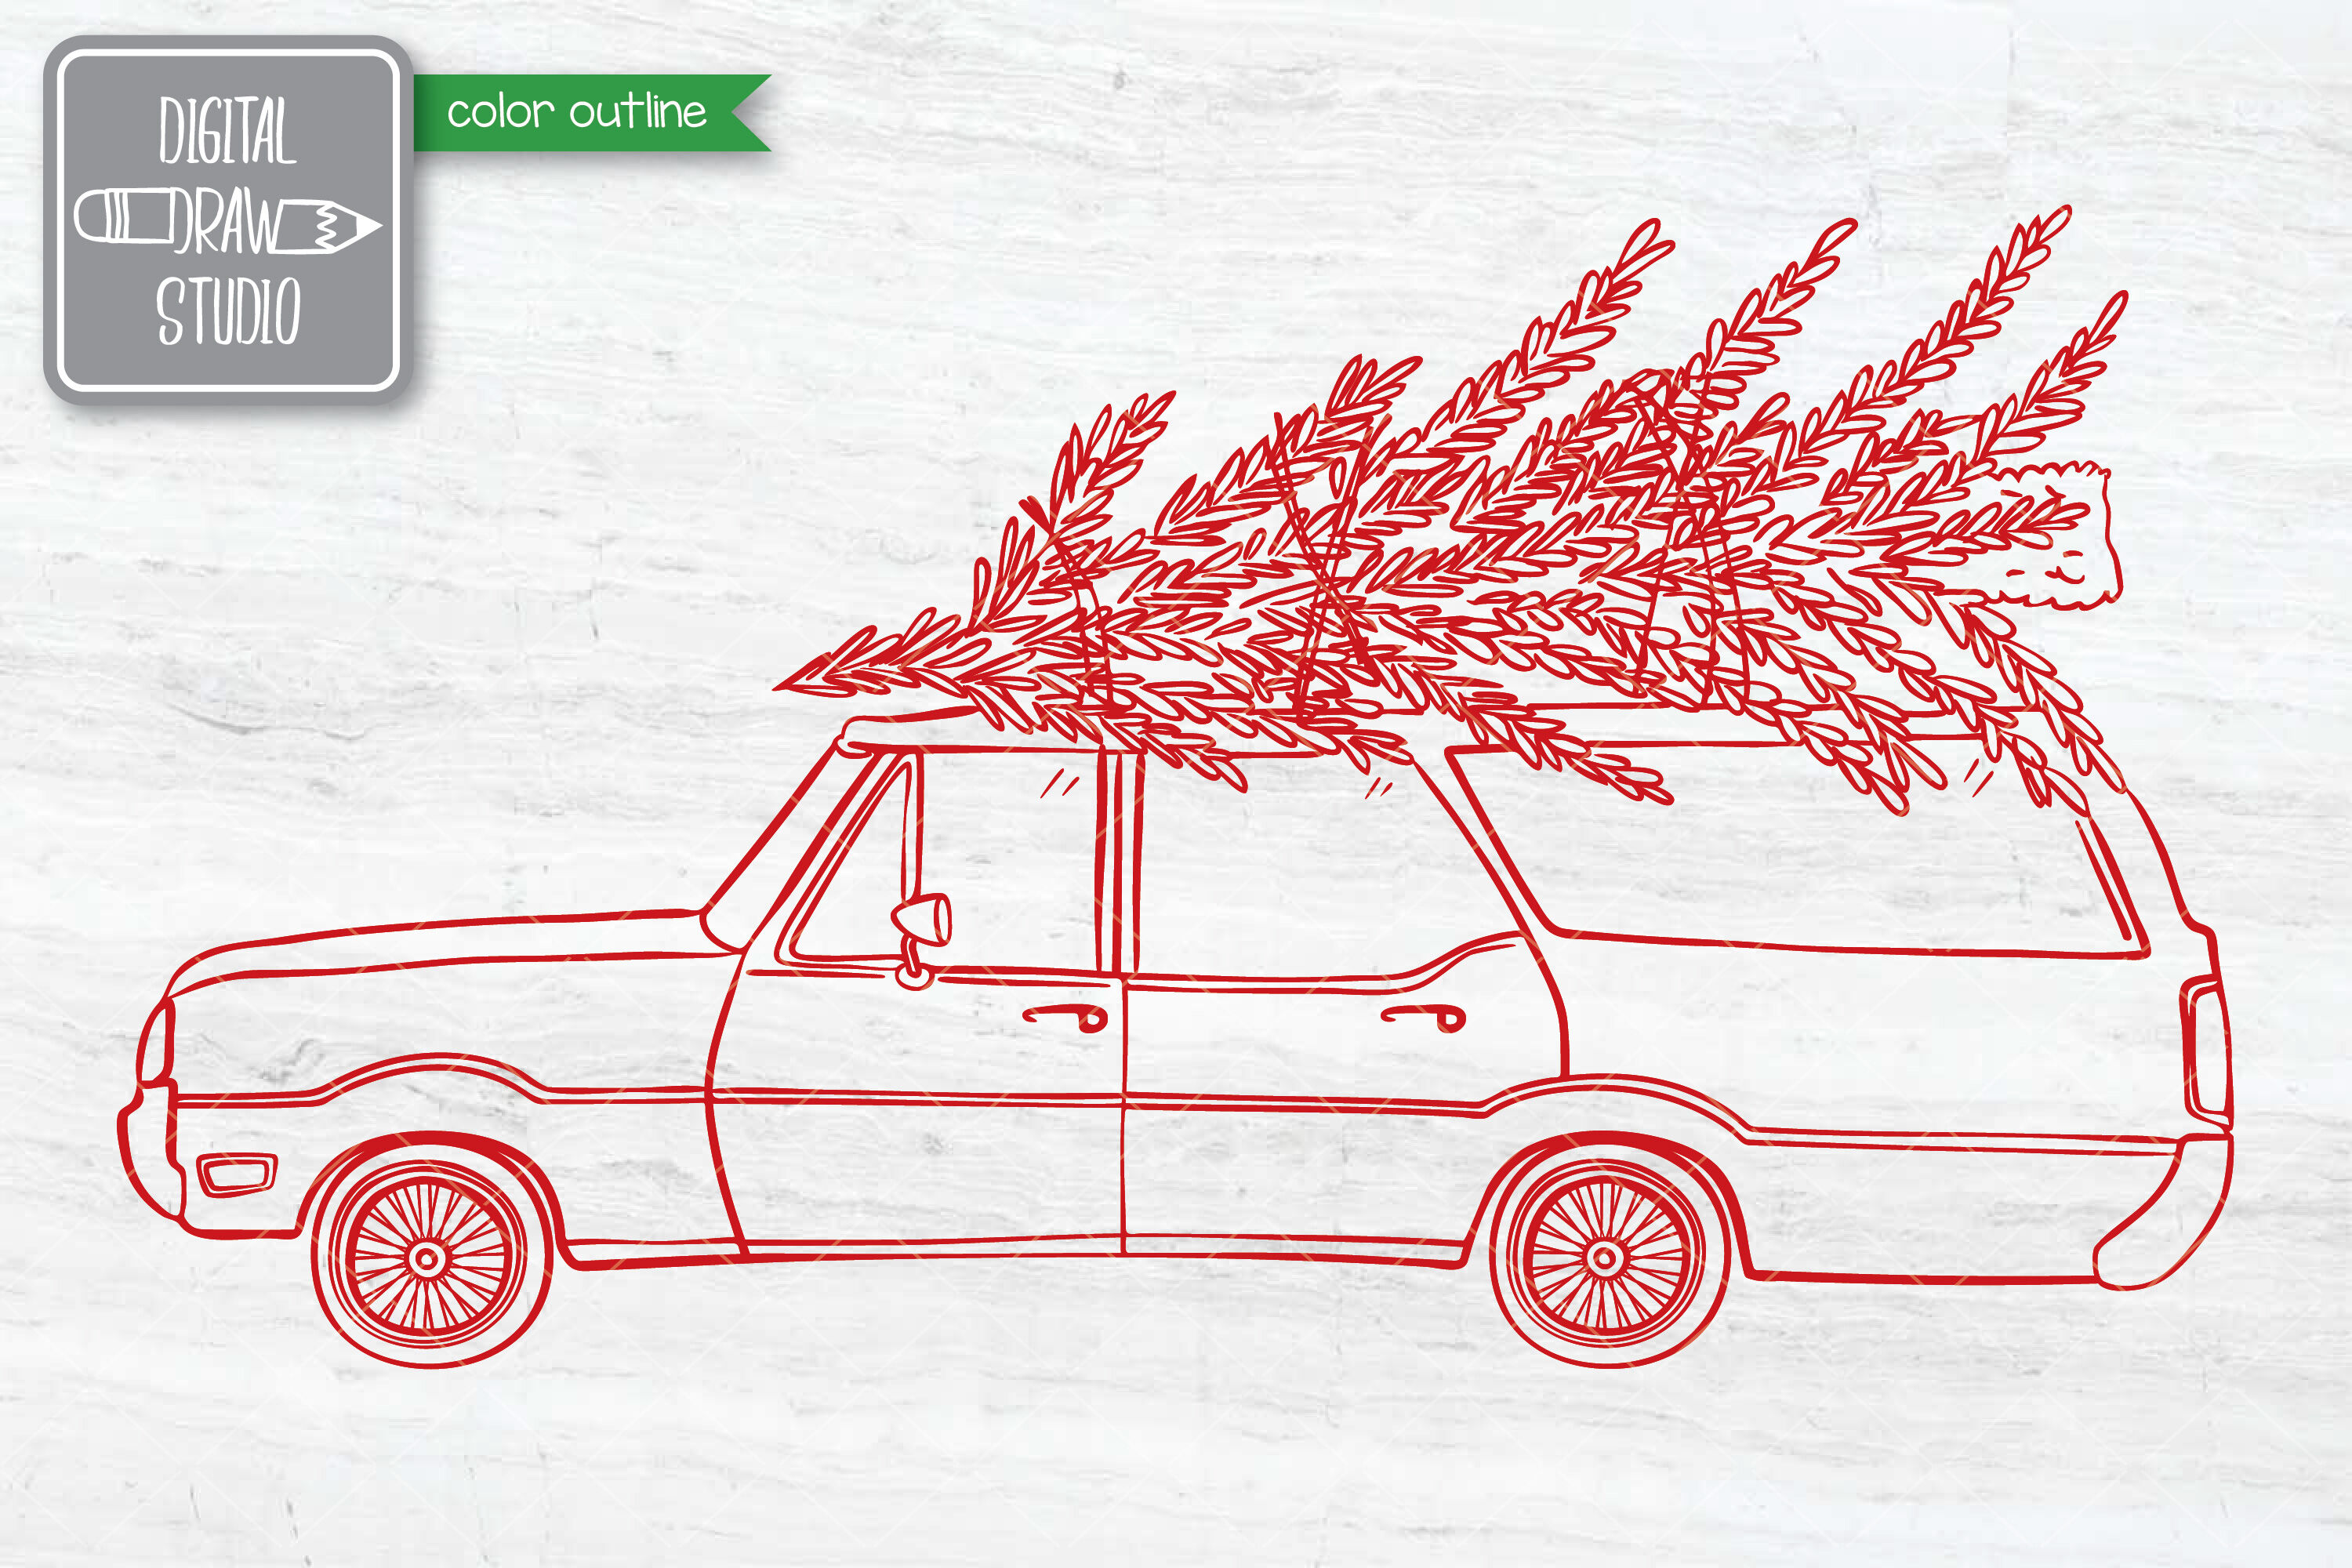 Colored Station Wagon Car With Christmas Tree On Roof Top Holiday By Digital Draw Studio Thehungryjpeg Com